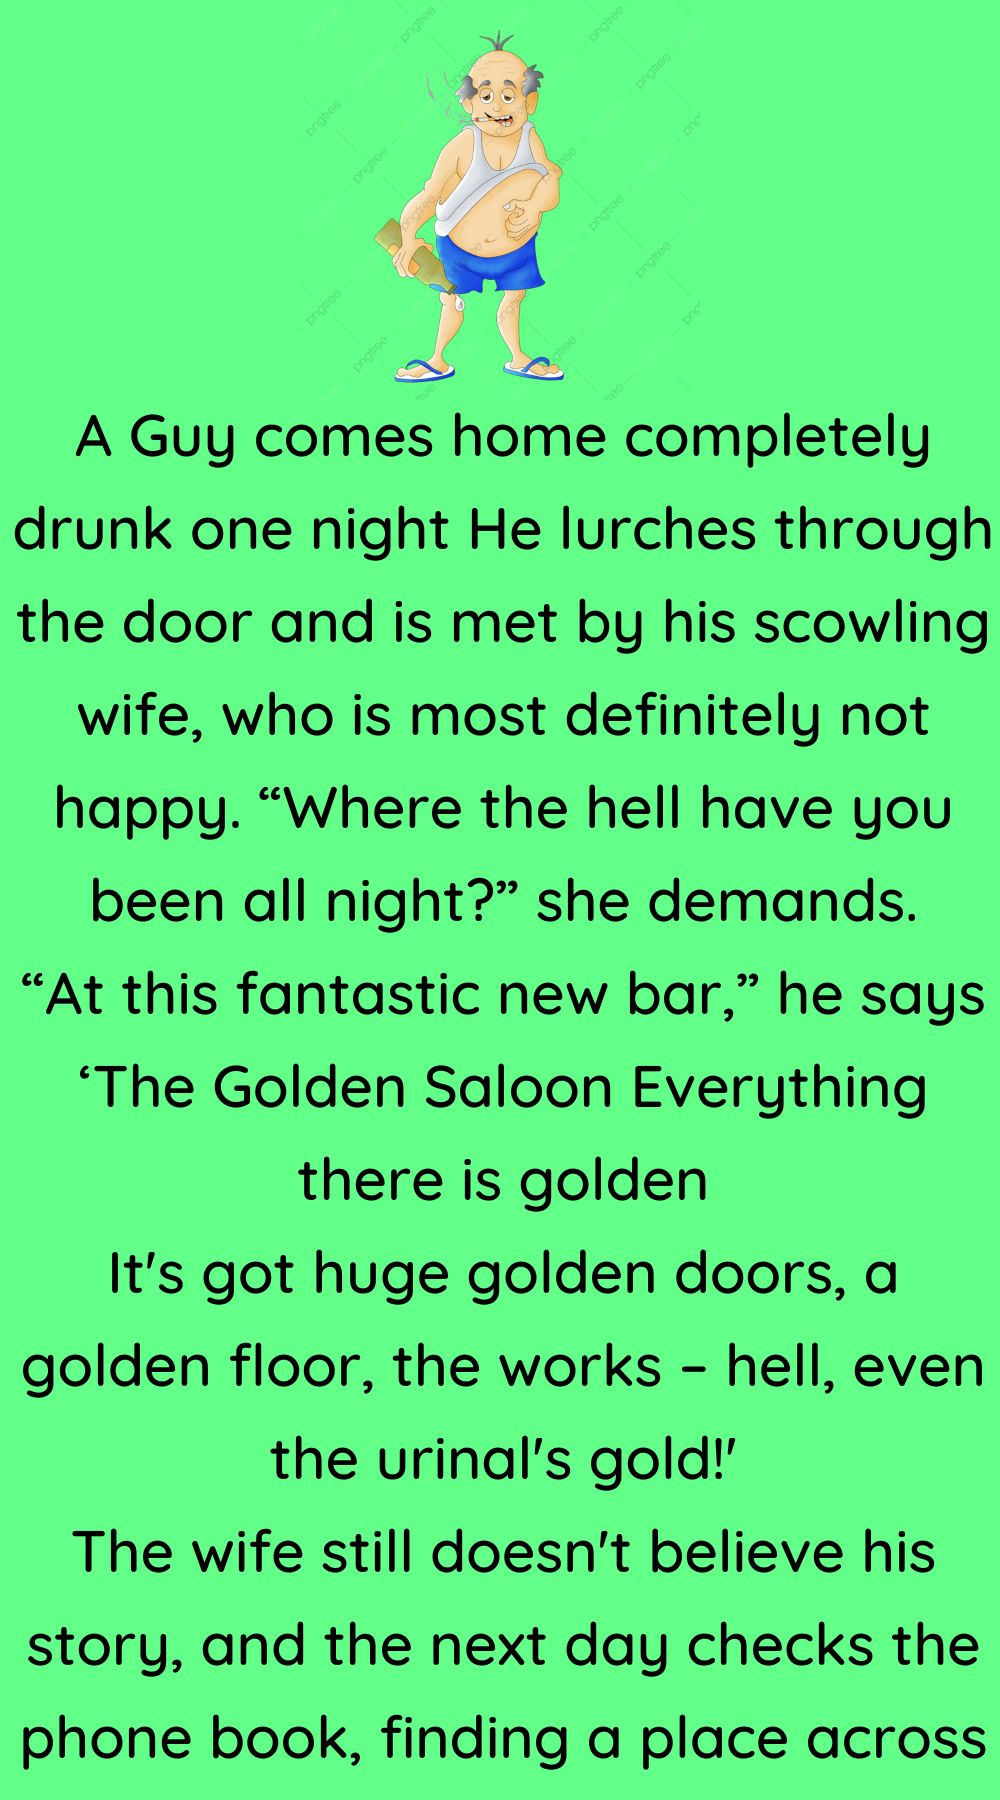 A Guy comes home completely drunk 